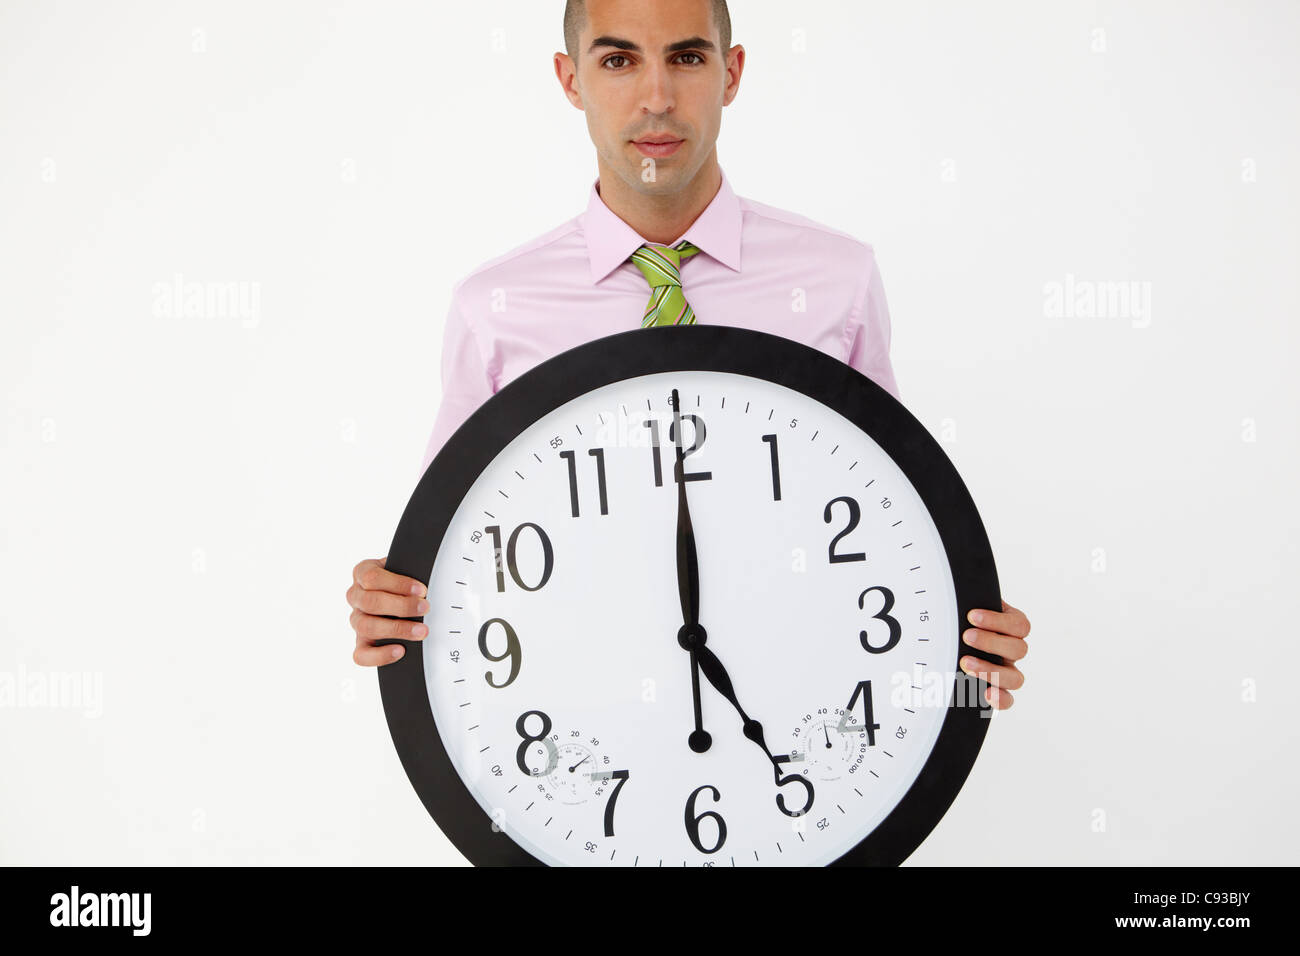 Young businessman with giant clock Stock Photo